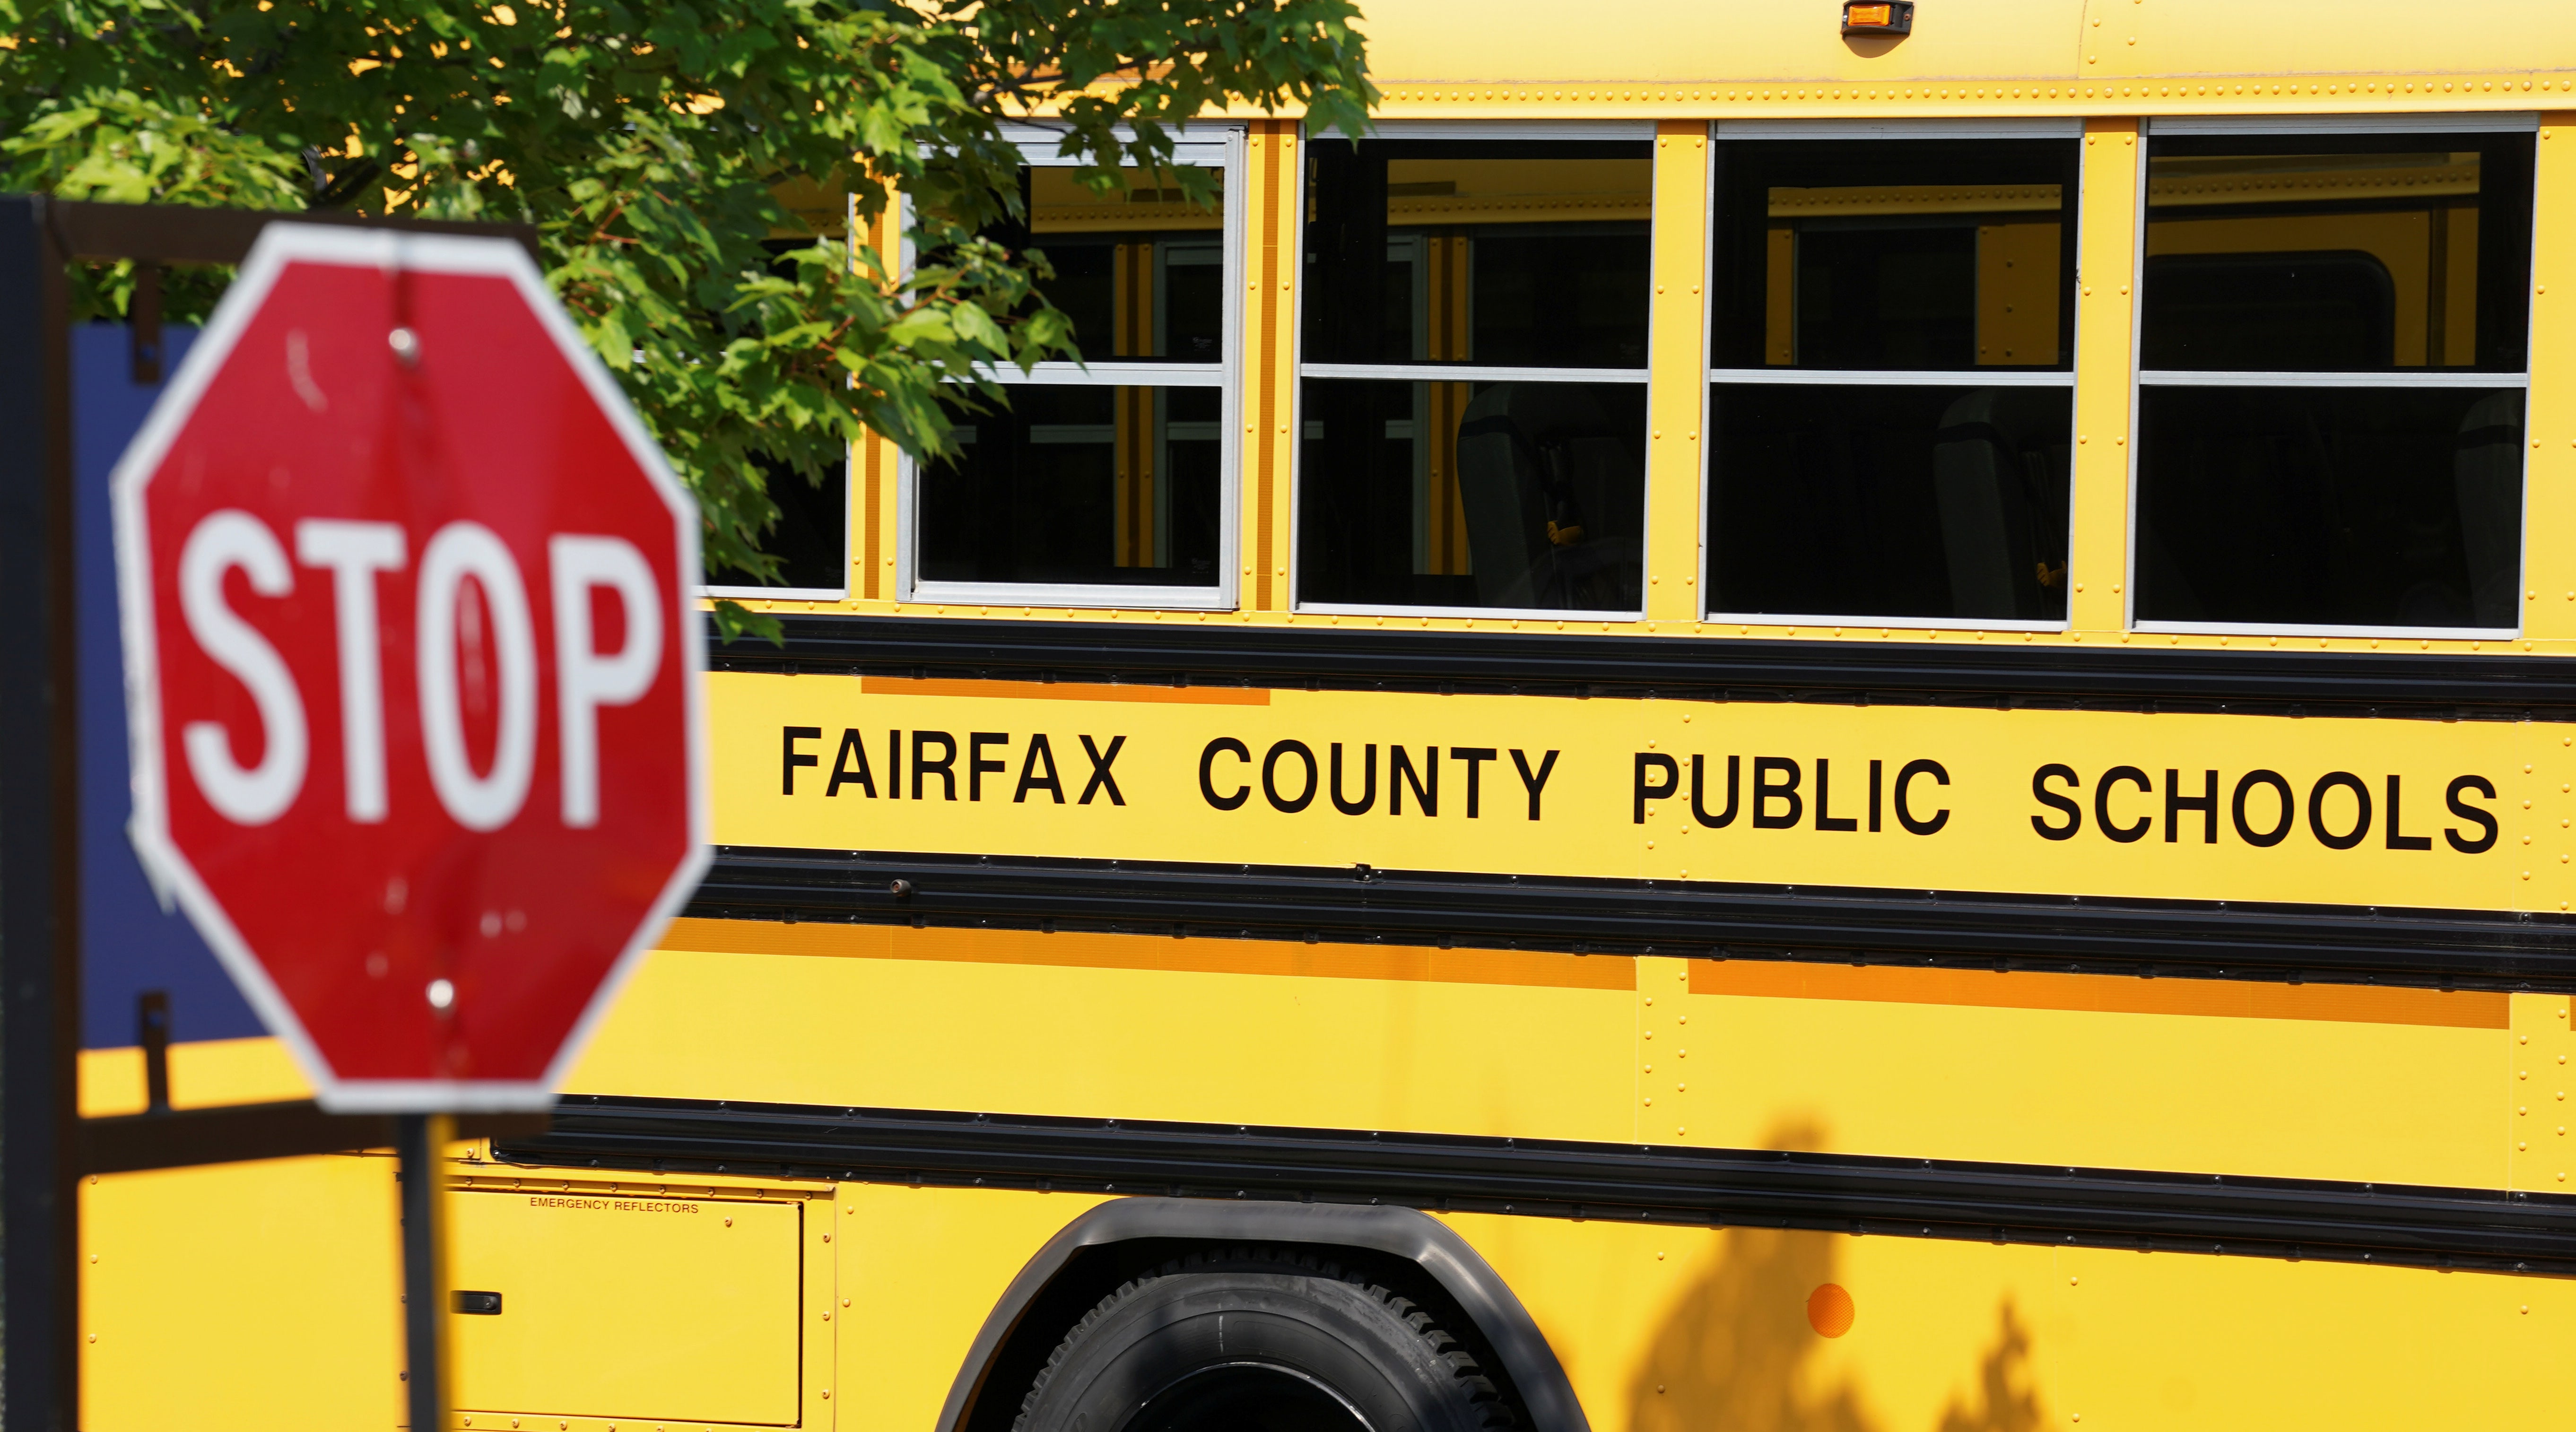  Parents blasts Fairfax school board for shuttering schools, leading a 'race to the bottom' 